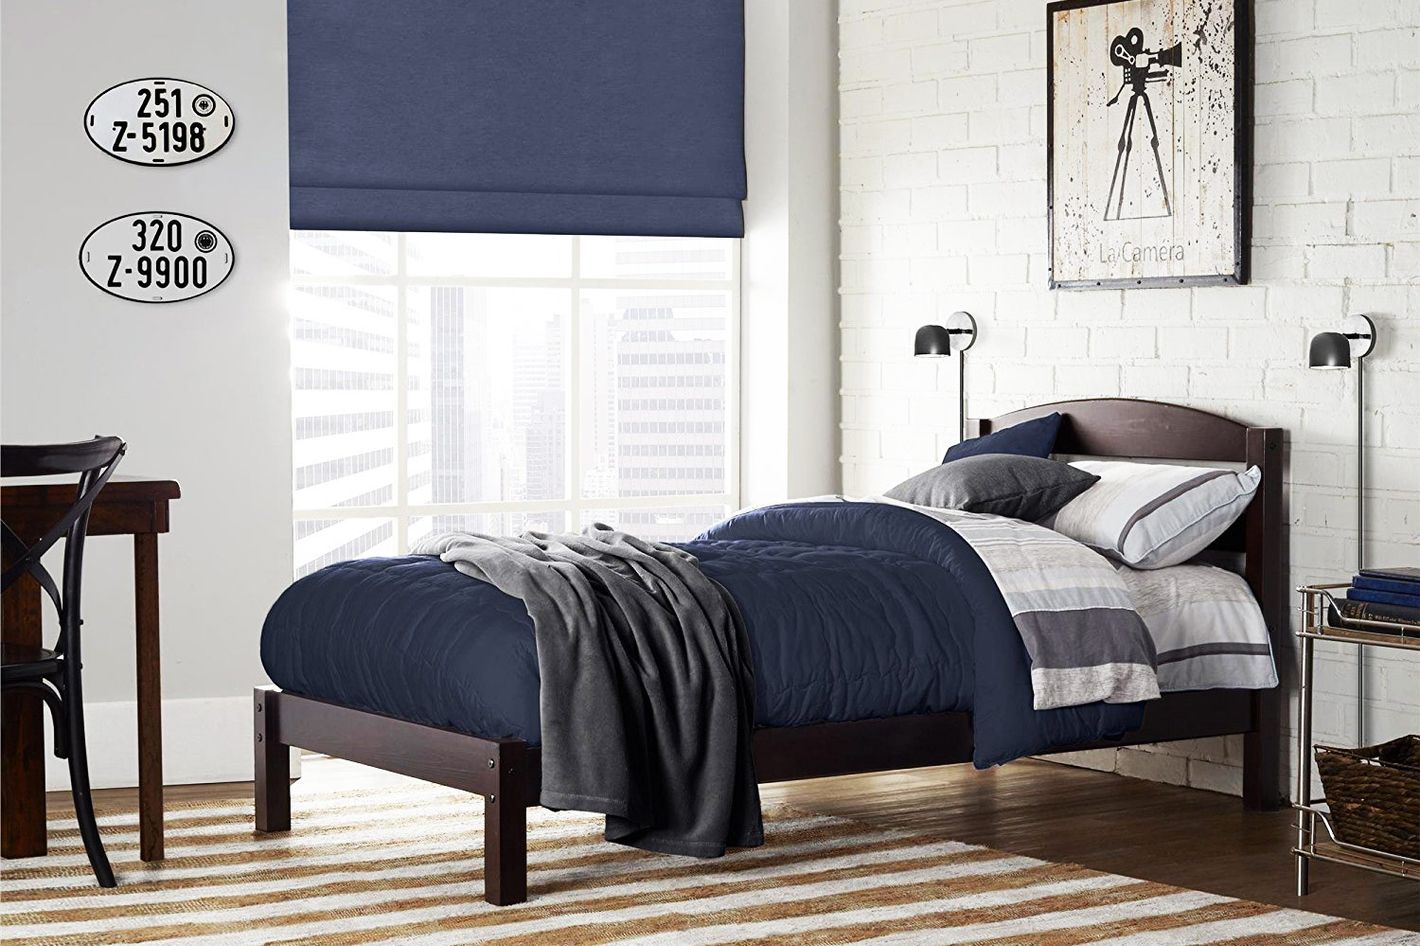 12 Best Twin Beds For Kids 2019, How To Put Twin Beds In A Small Room